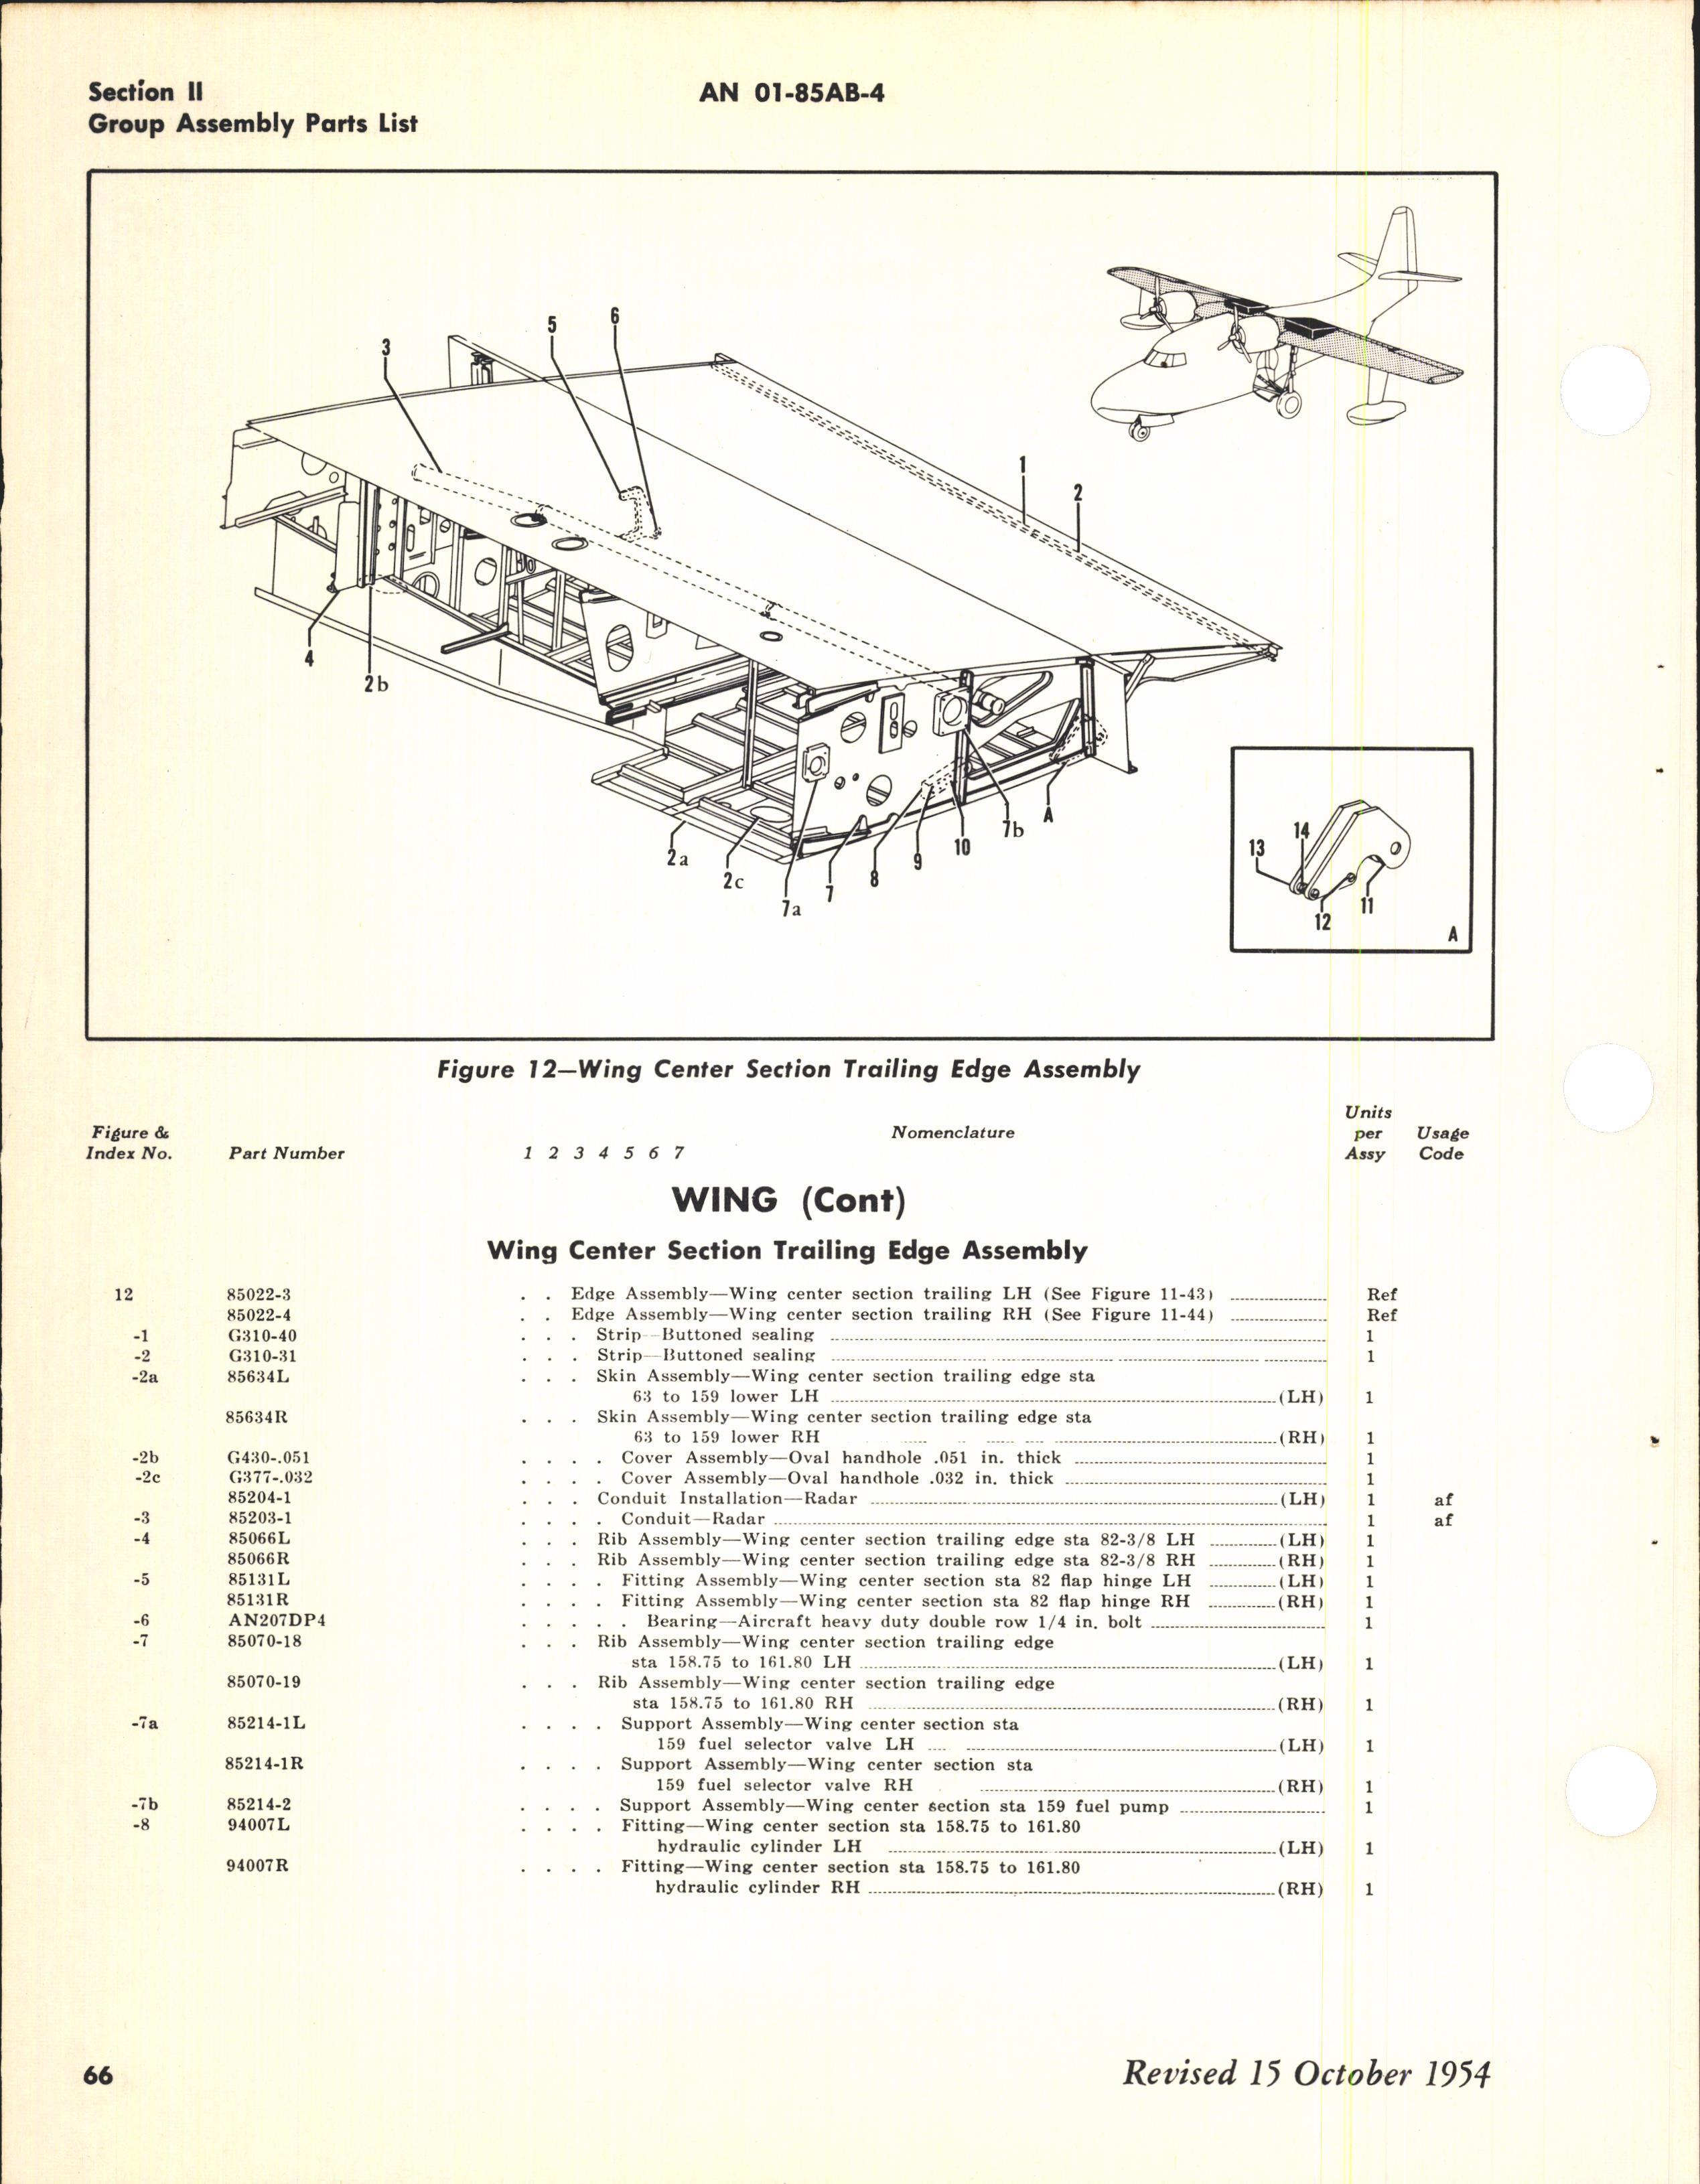 Sample page 36 from AirCorps Library document: Parts Catalog for UF-1, UF-1T, and SA-16A-GR Aircraft